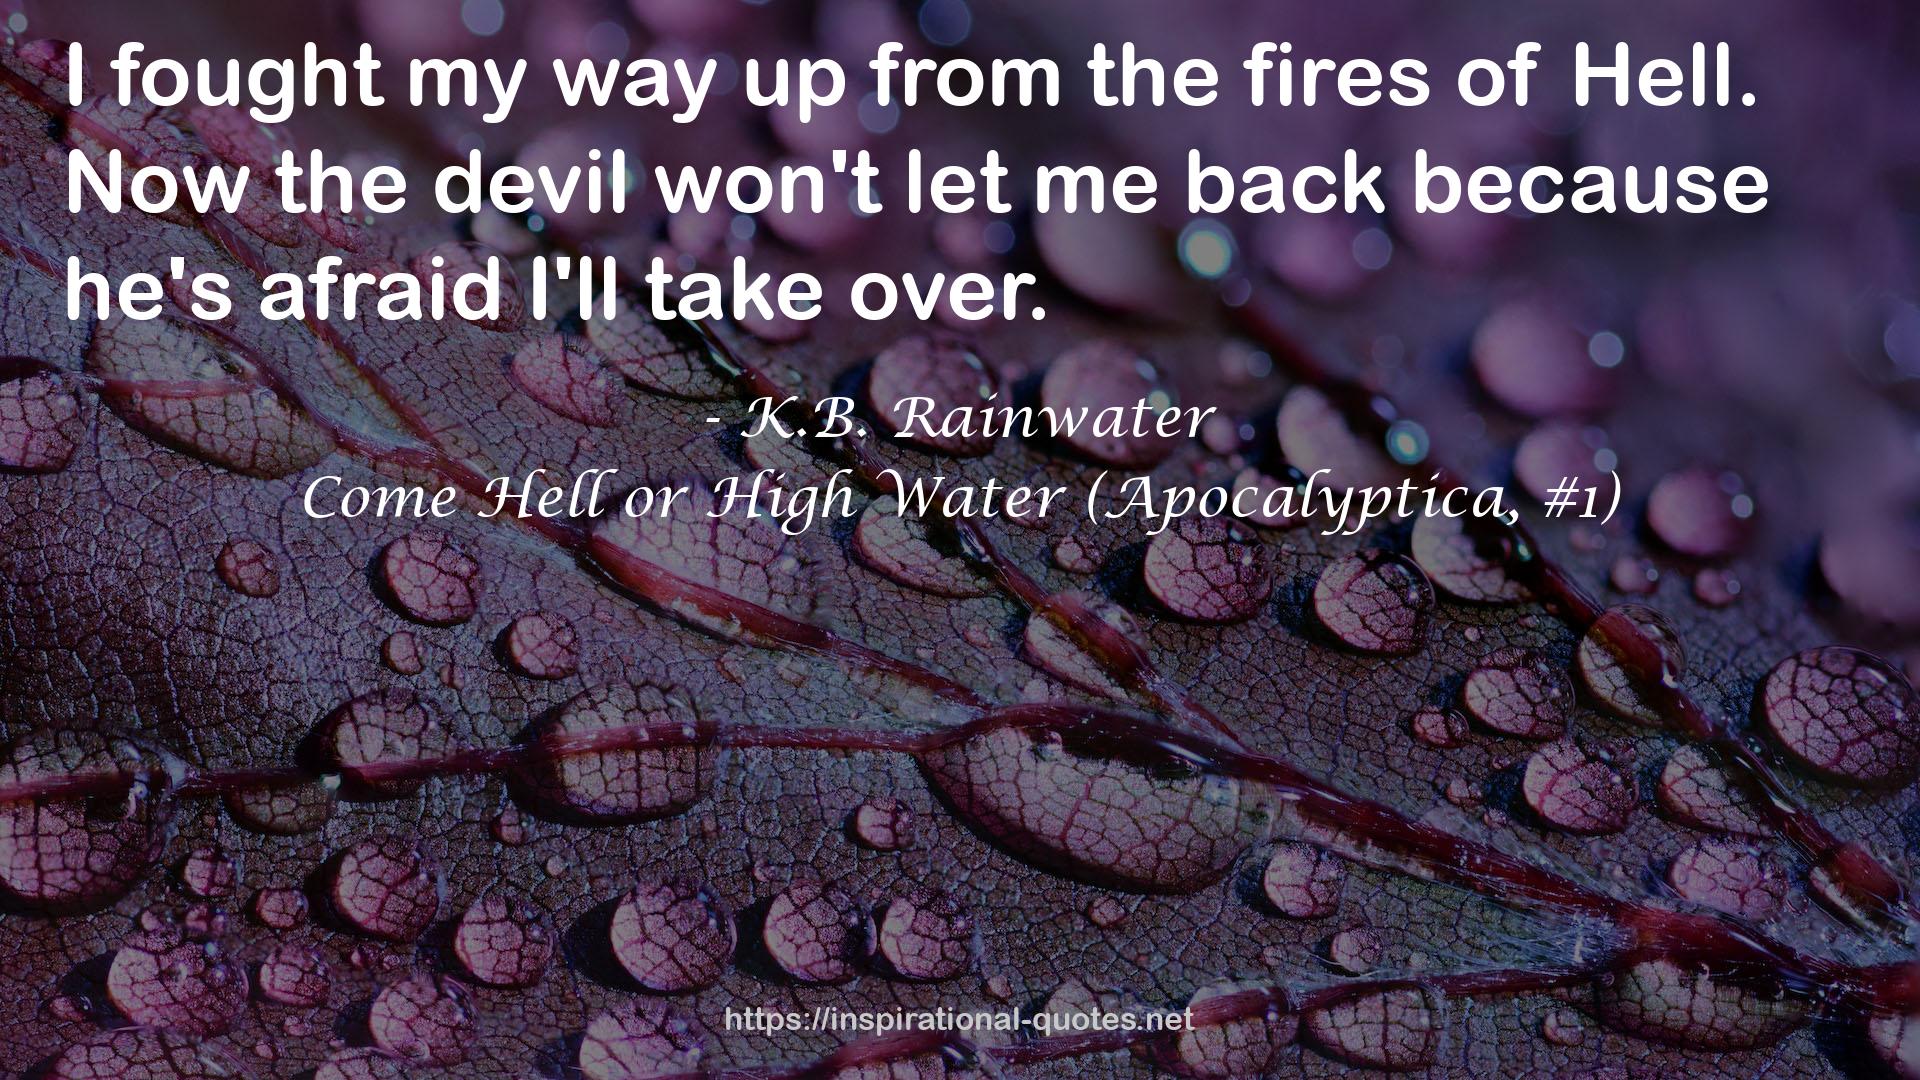 Come Hell or High Water (Apocalyptica, #1) QUOTES